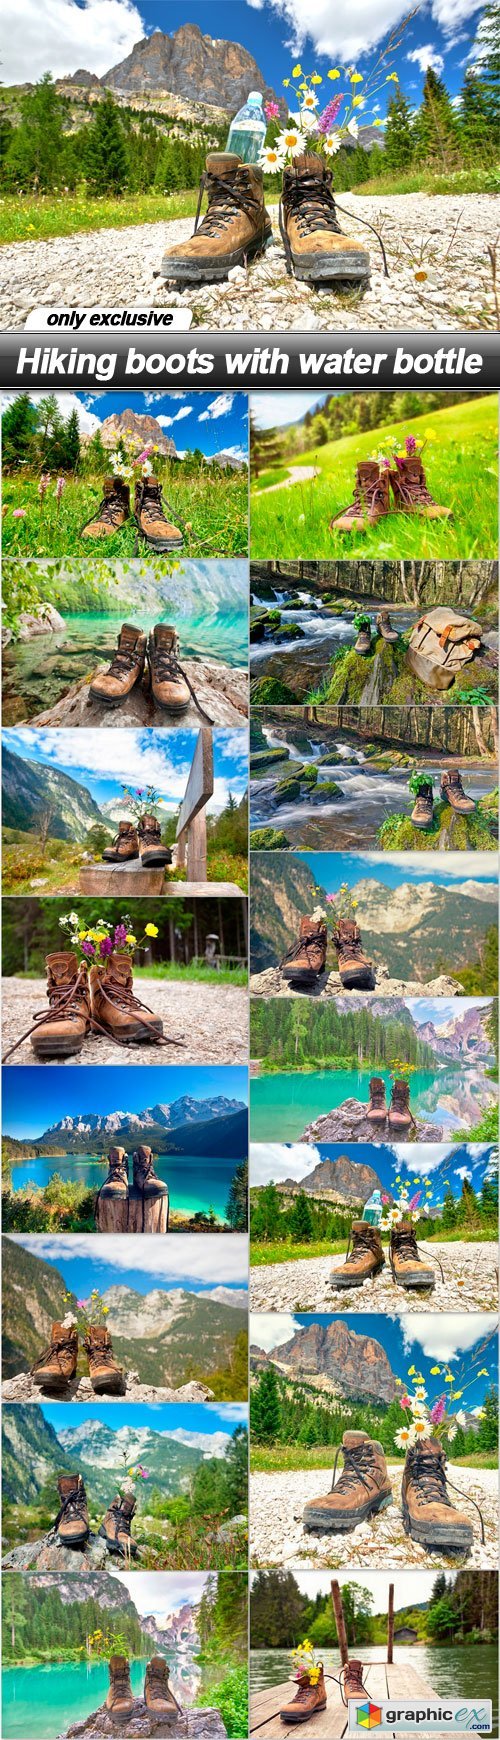 Hiking boots with water bottle - 16 UHQ JPEG